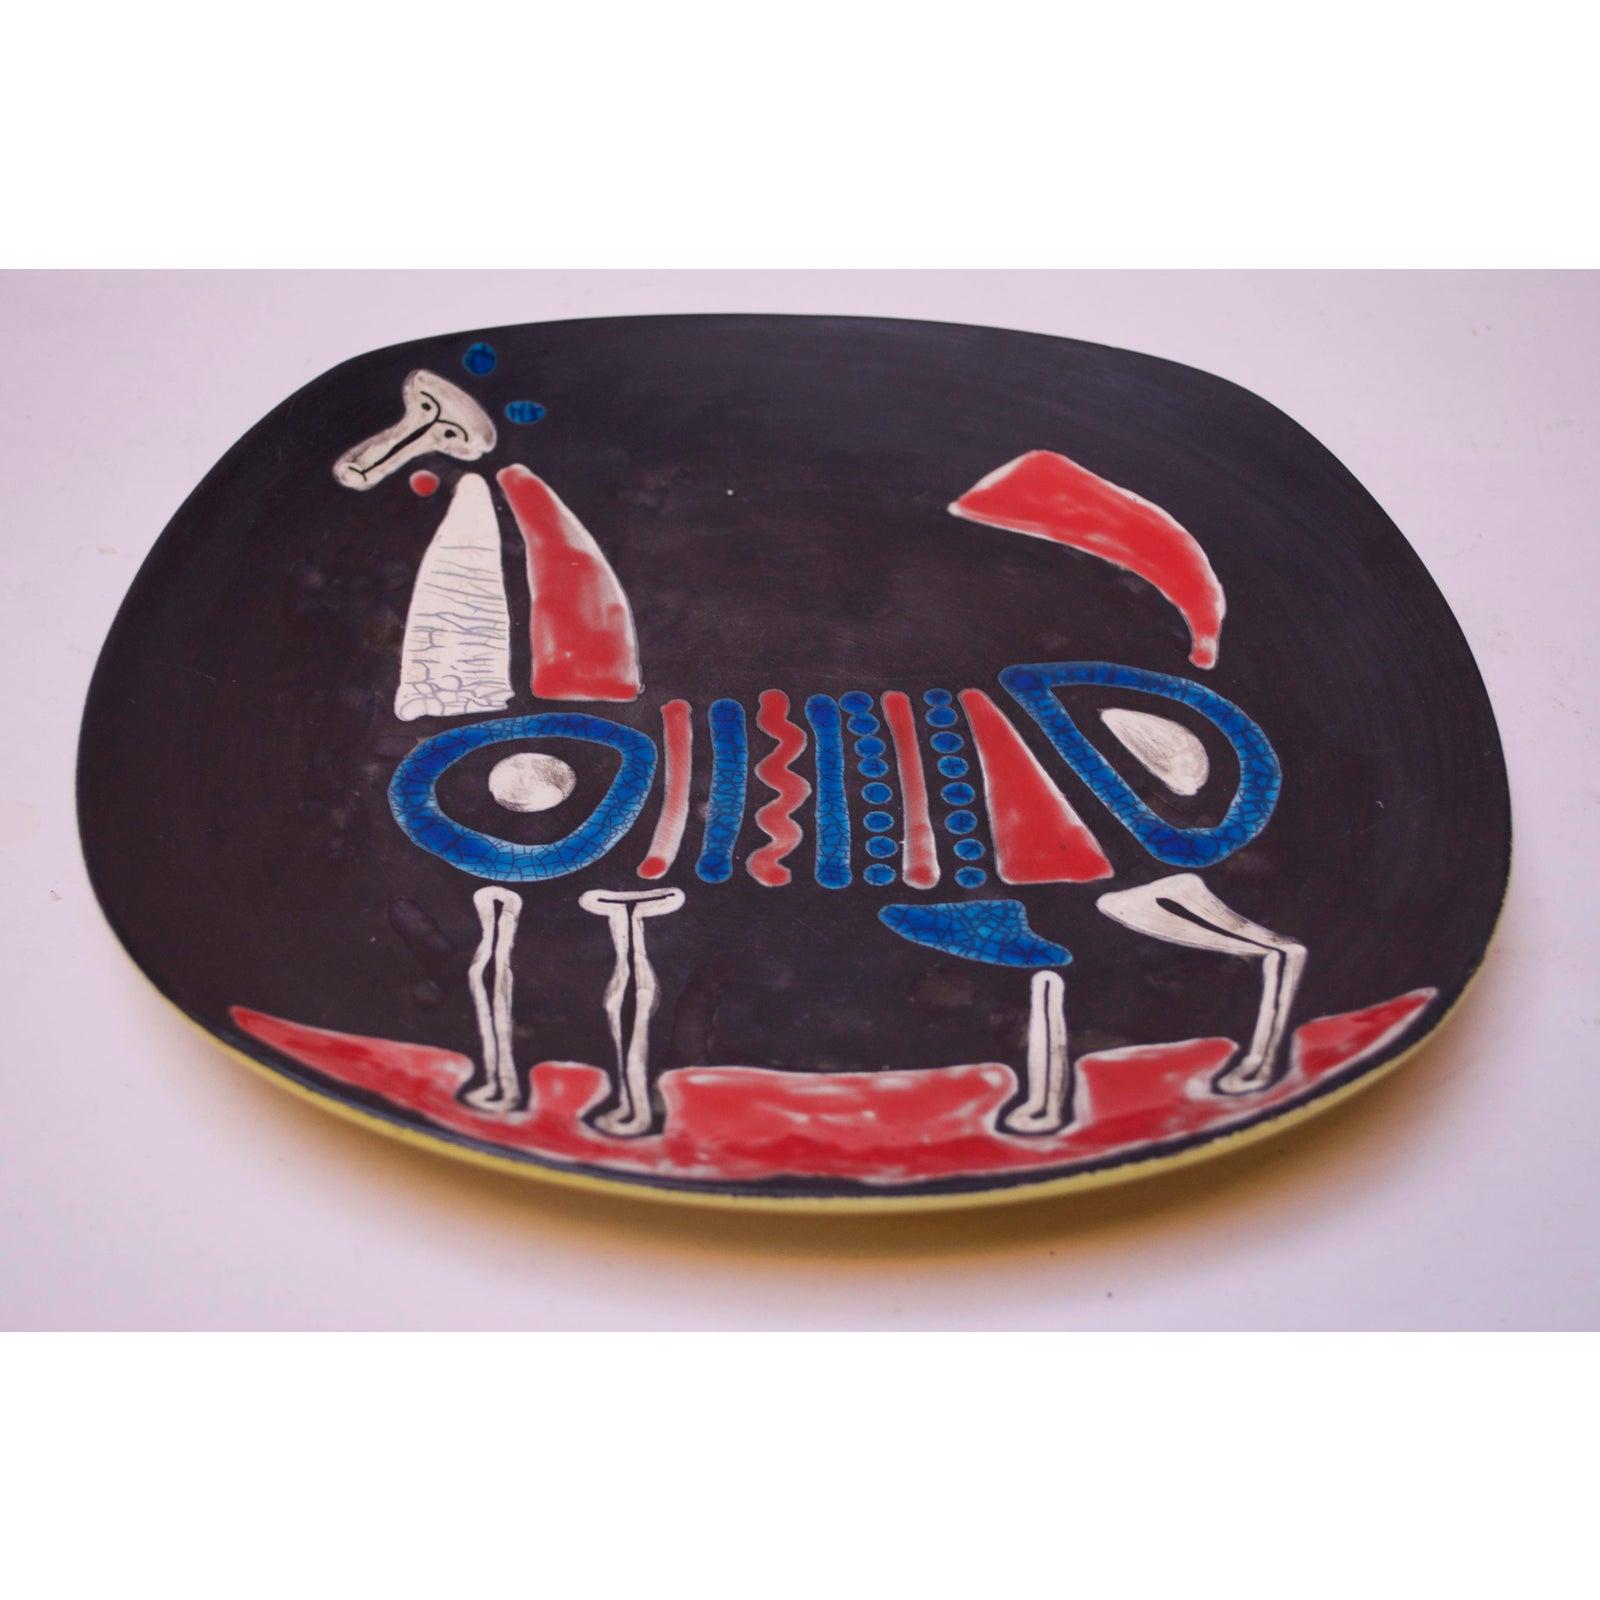 Hand painted ceramic Italian 1950s 'horse' decorative plate / charger by Raymor. Vibrant colors in blue, red, and white against a black background with glossy yellow underside styled after Picasso / Cubism. Very nice, vintage condition with slight